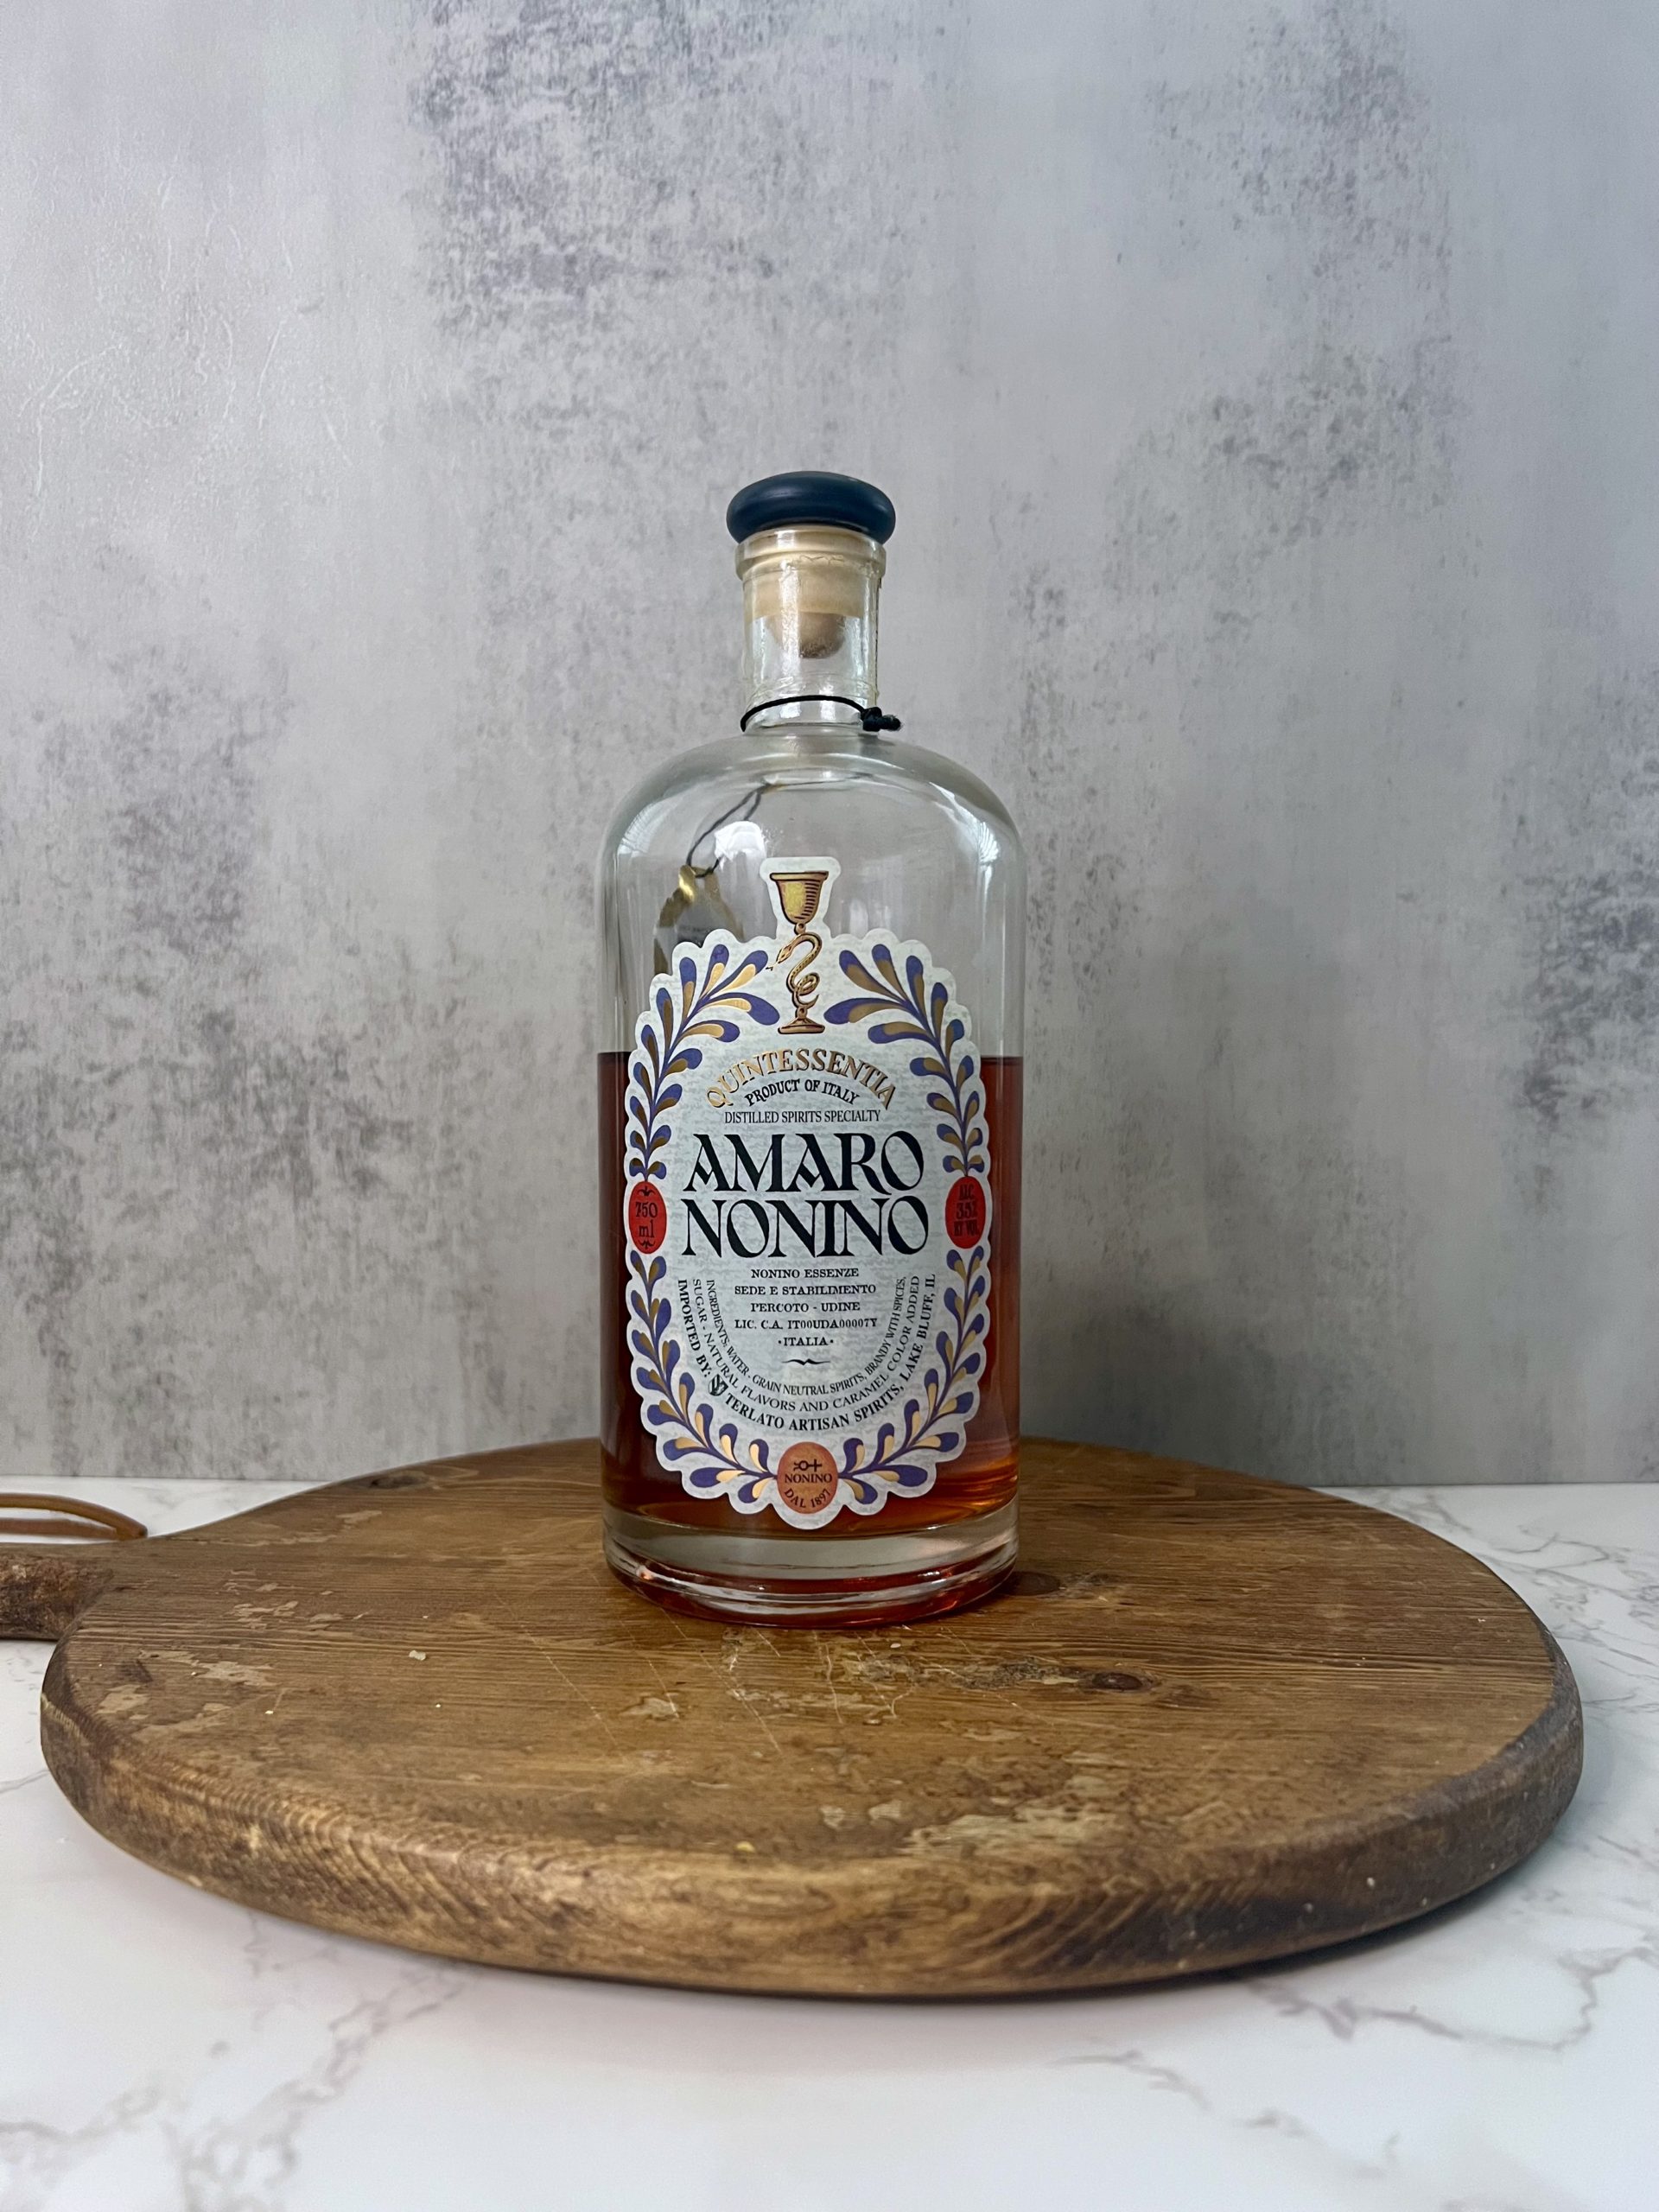 A bottle of Amaro Nonino on a countertop.